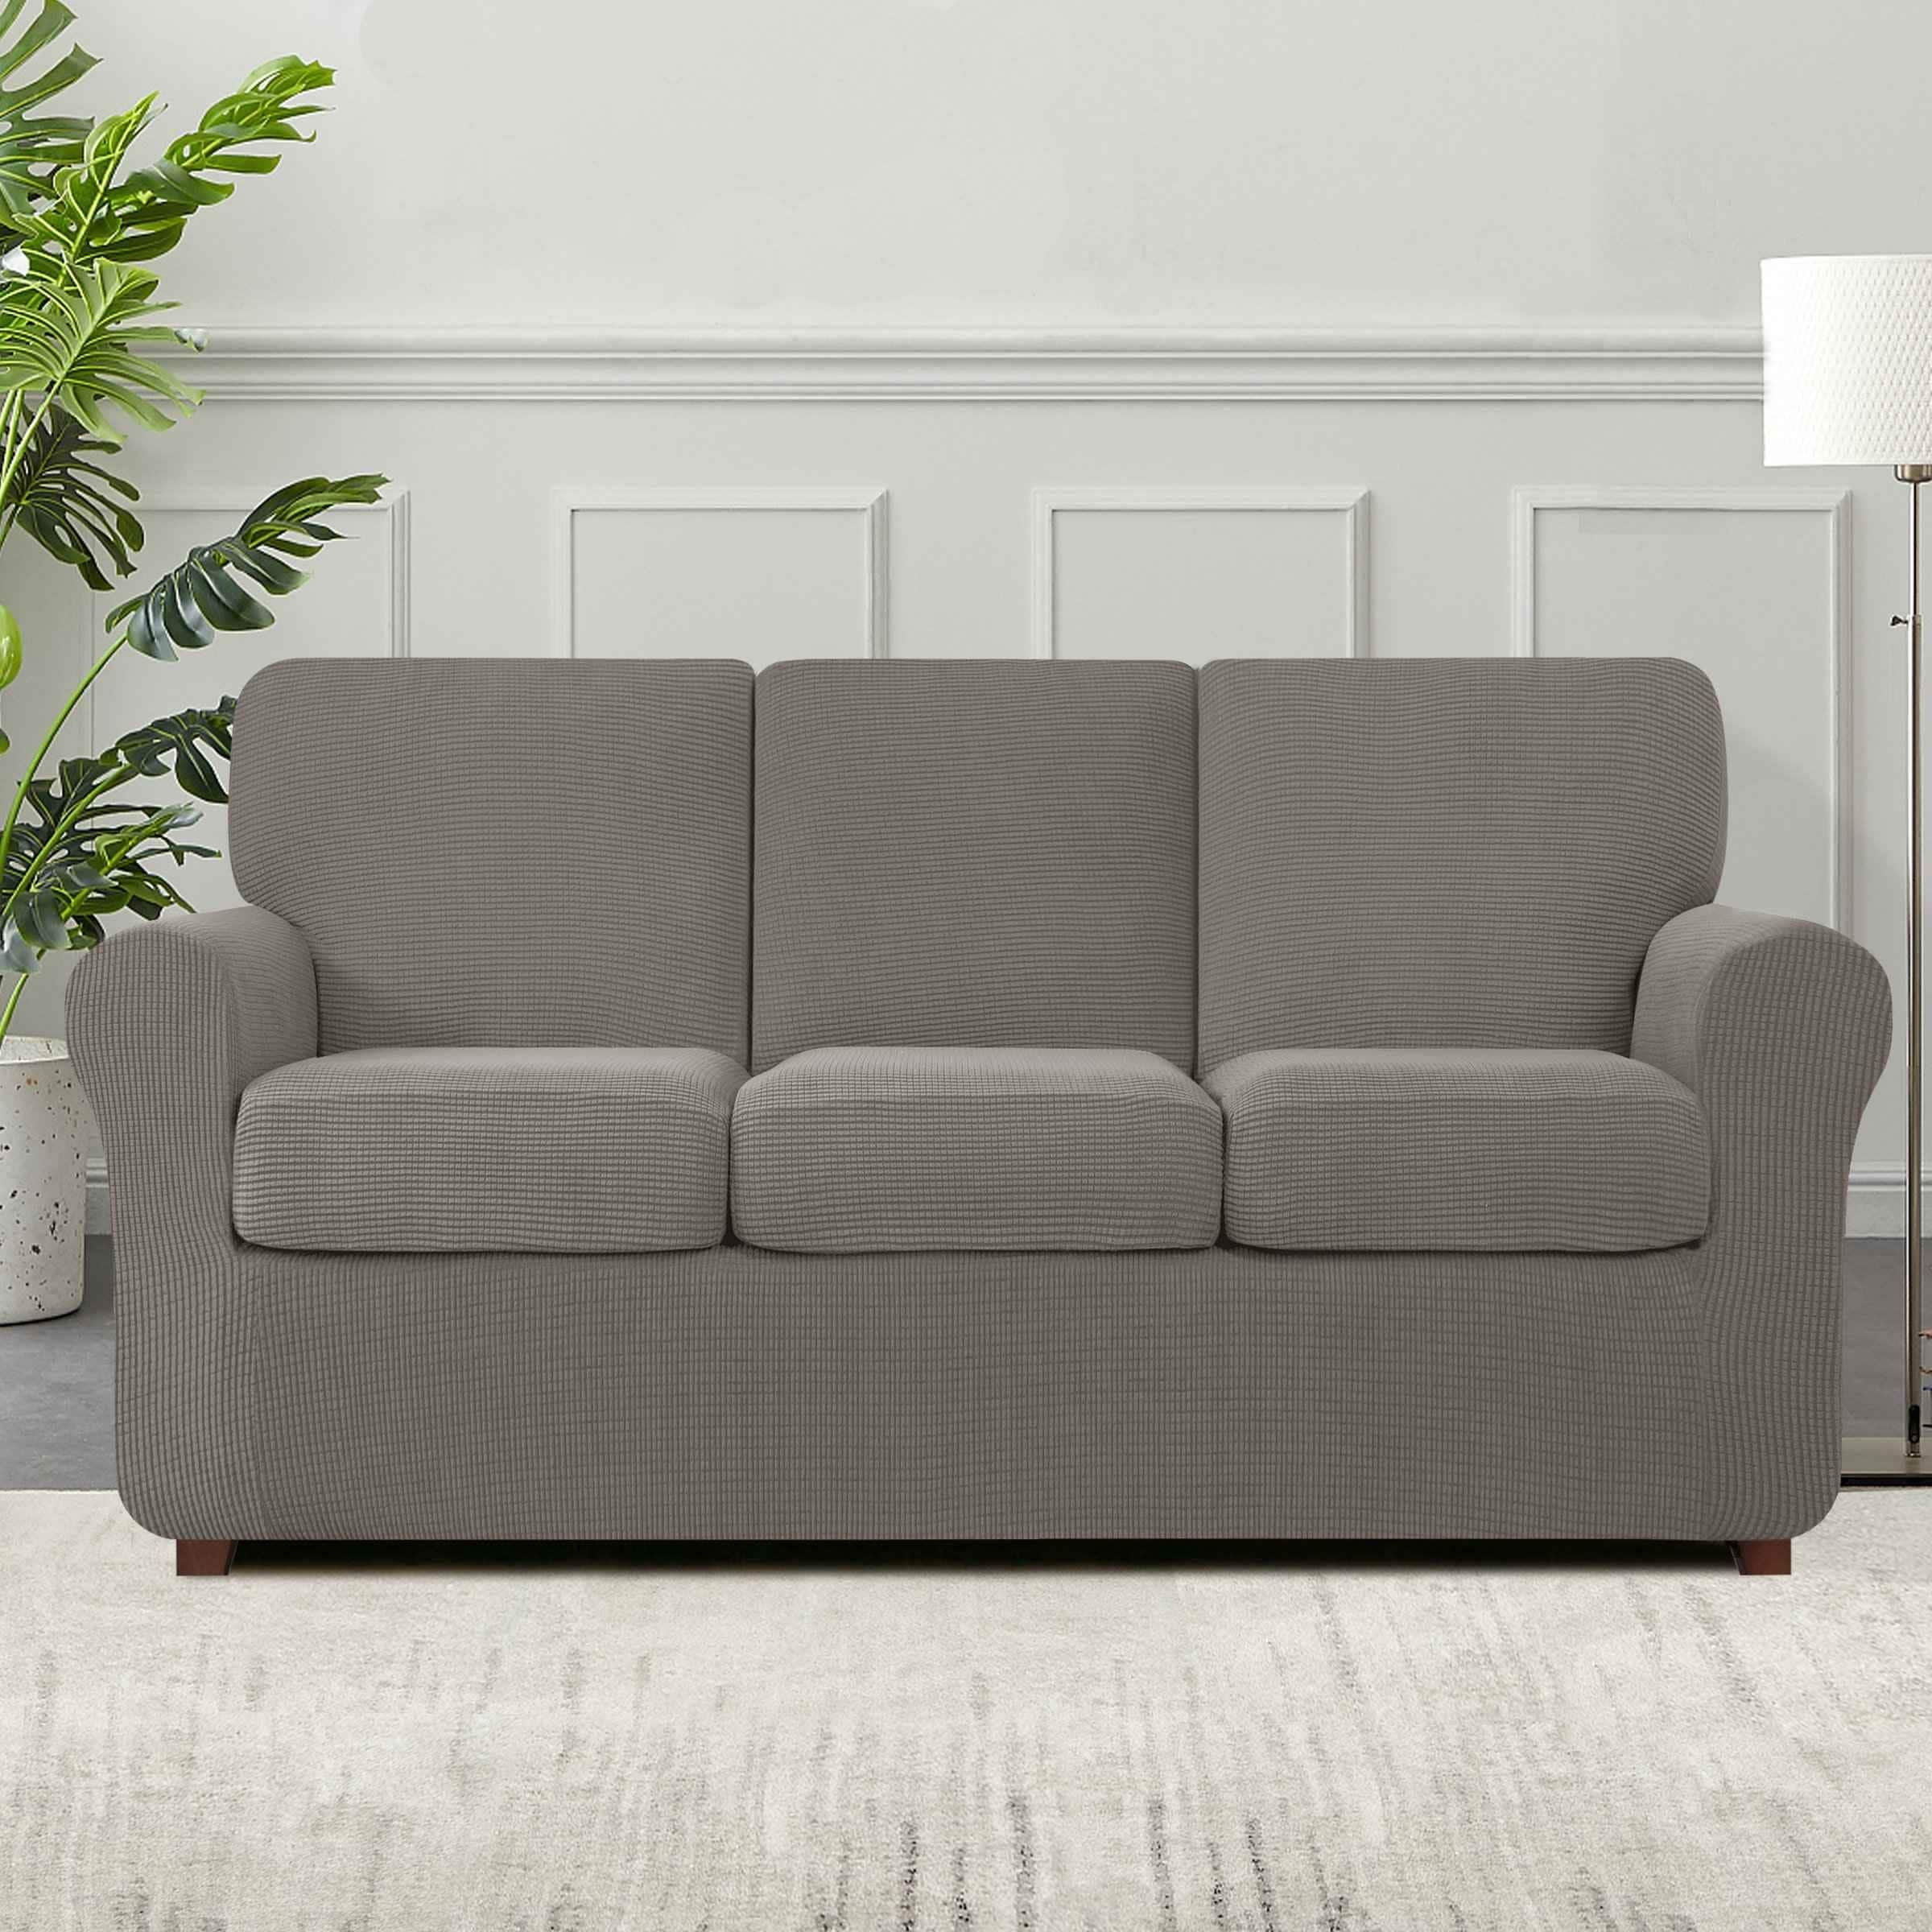 https://ak1.ostkcdn.com/images/products/is/images/direct/1eea77b2318b47042cf61034c4057d1ec8c26610/Subrtex-7-Piece-Stretch-Sofa-Slipcover-Sets-with-3-Backrest-Cushion-Covers-and-3-Seat-Cushion-Covers.jpg